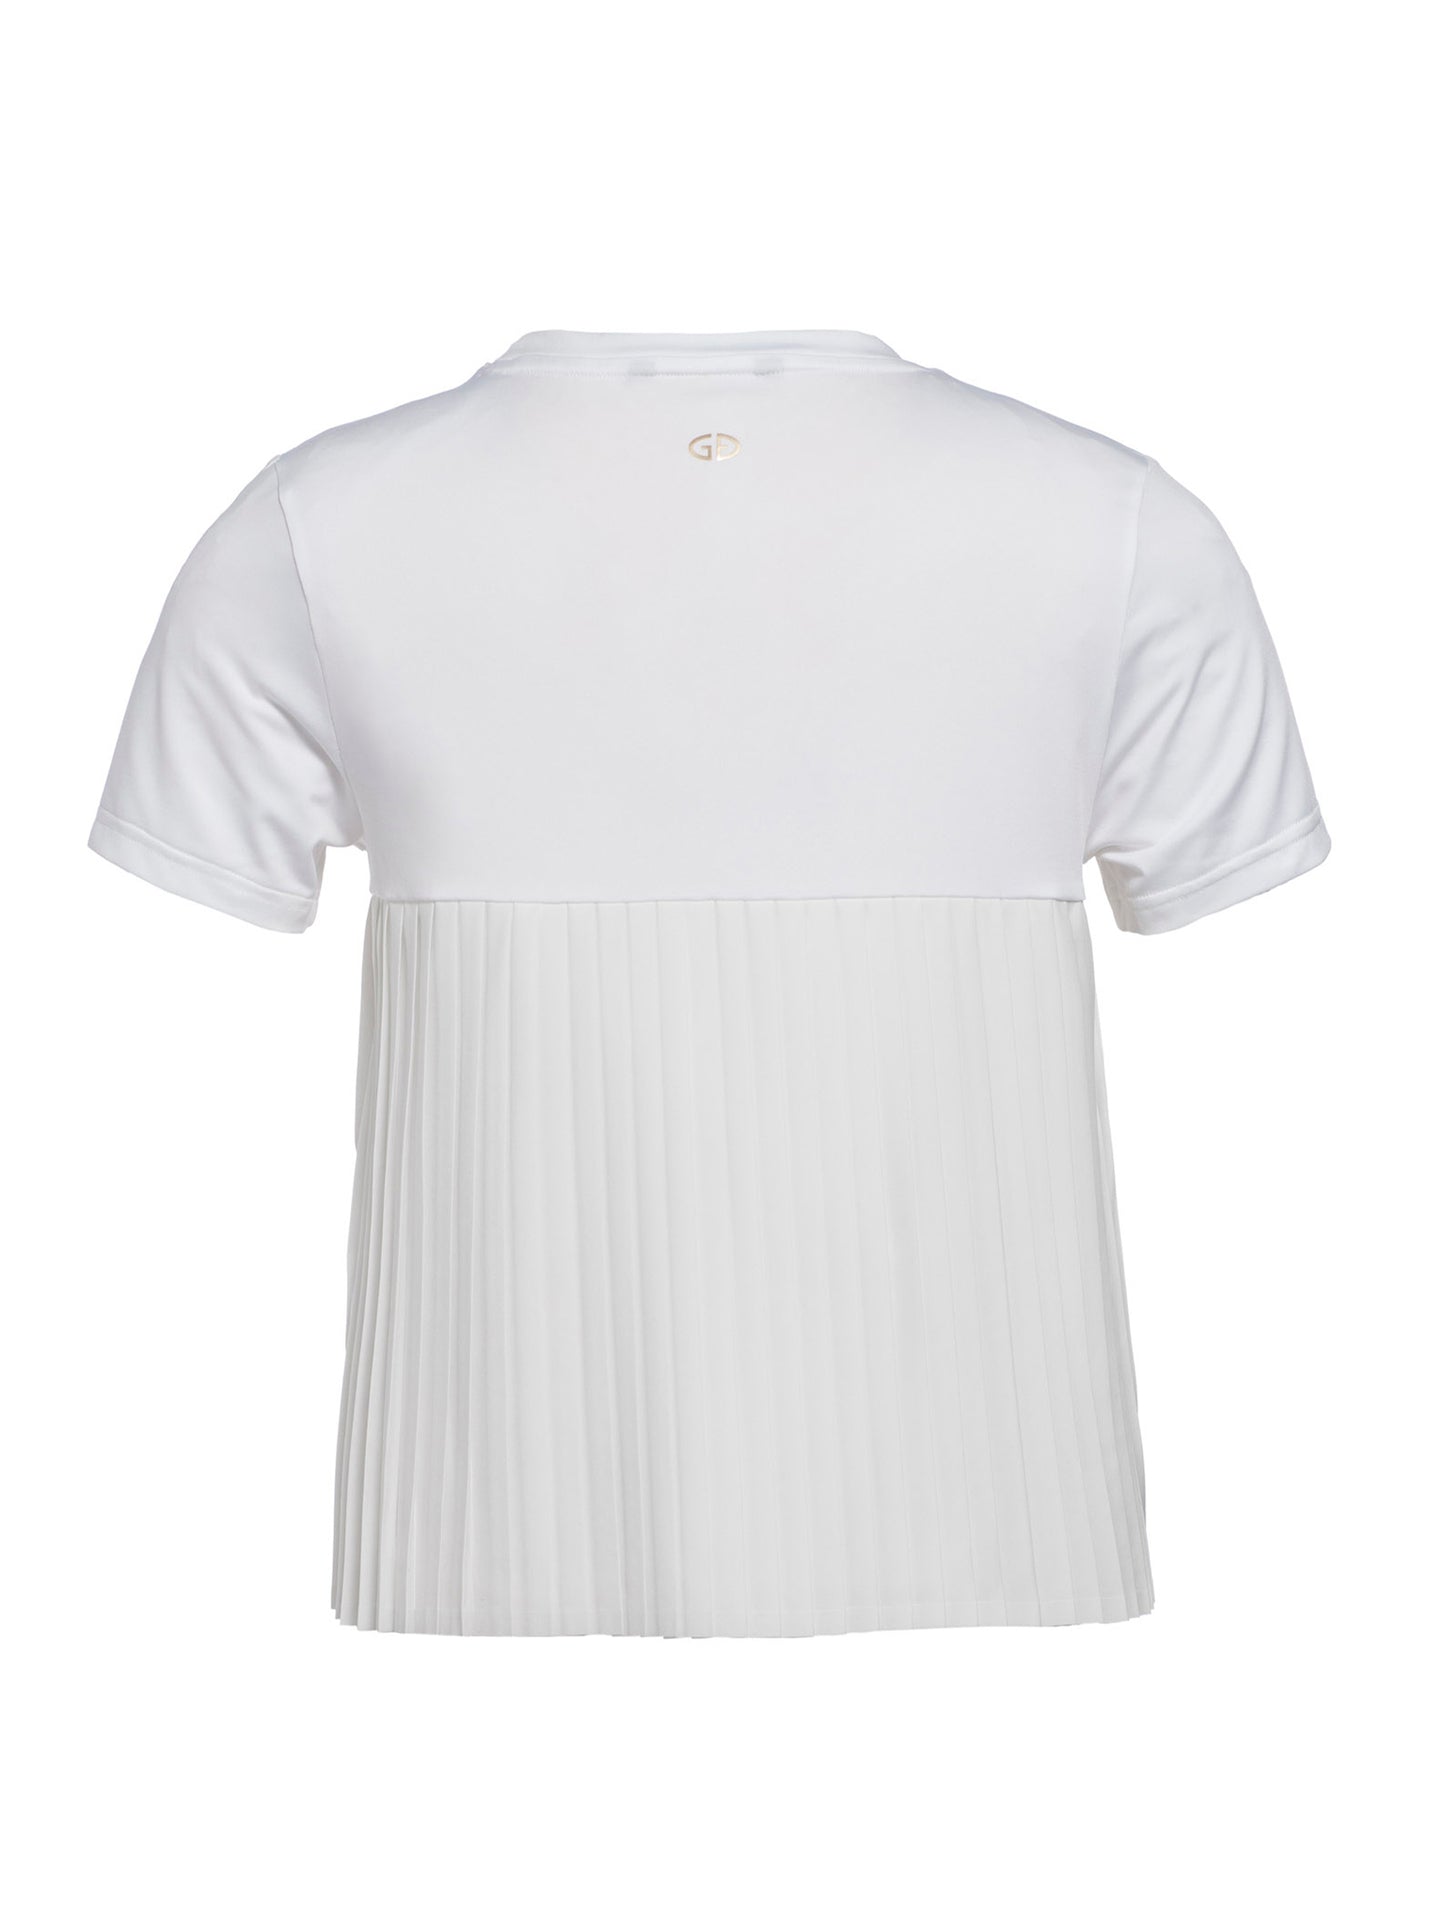 GROOVE short sleeve top white